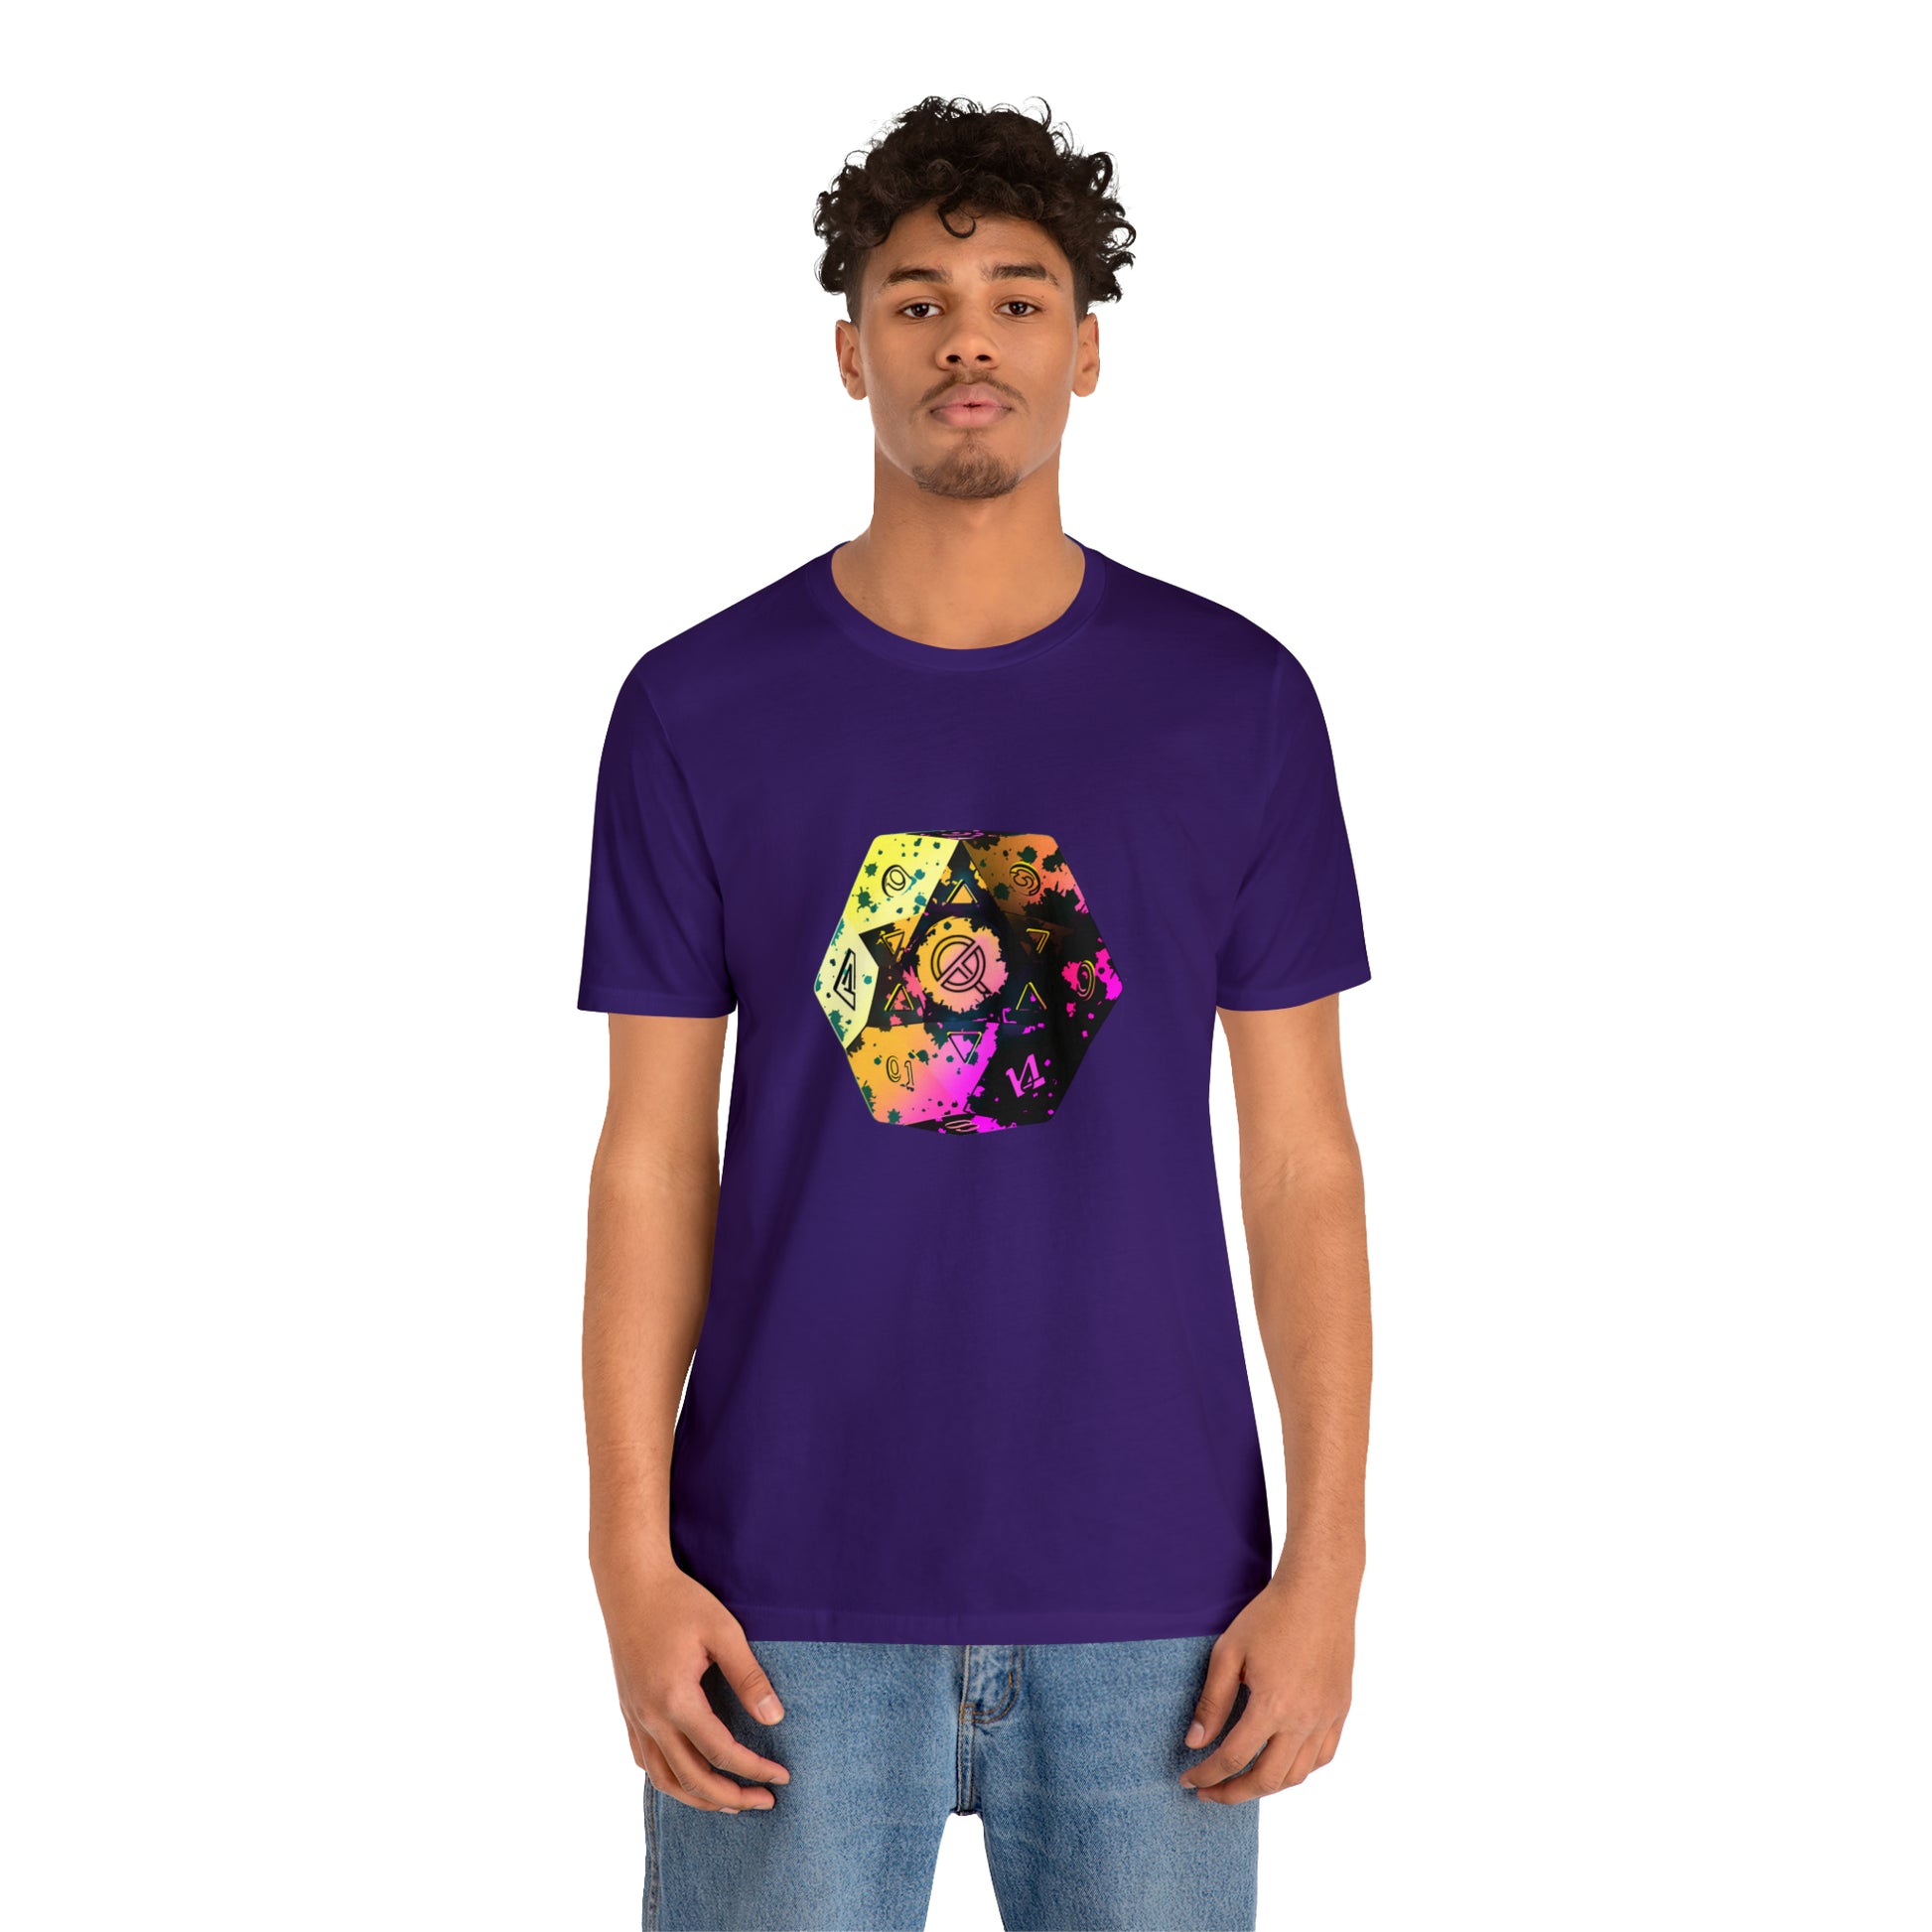 team-purple-quest-thread-tee-shirt-with-large-neon-d20-dice-on-center